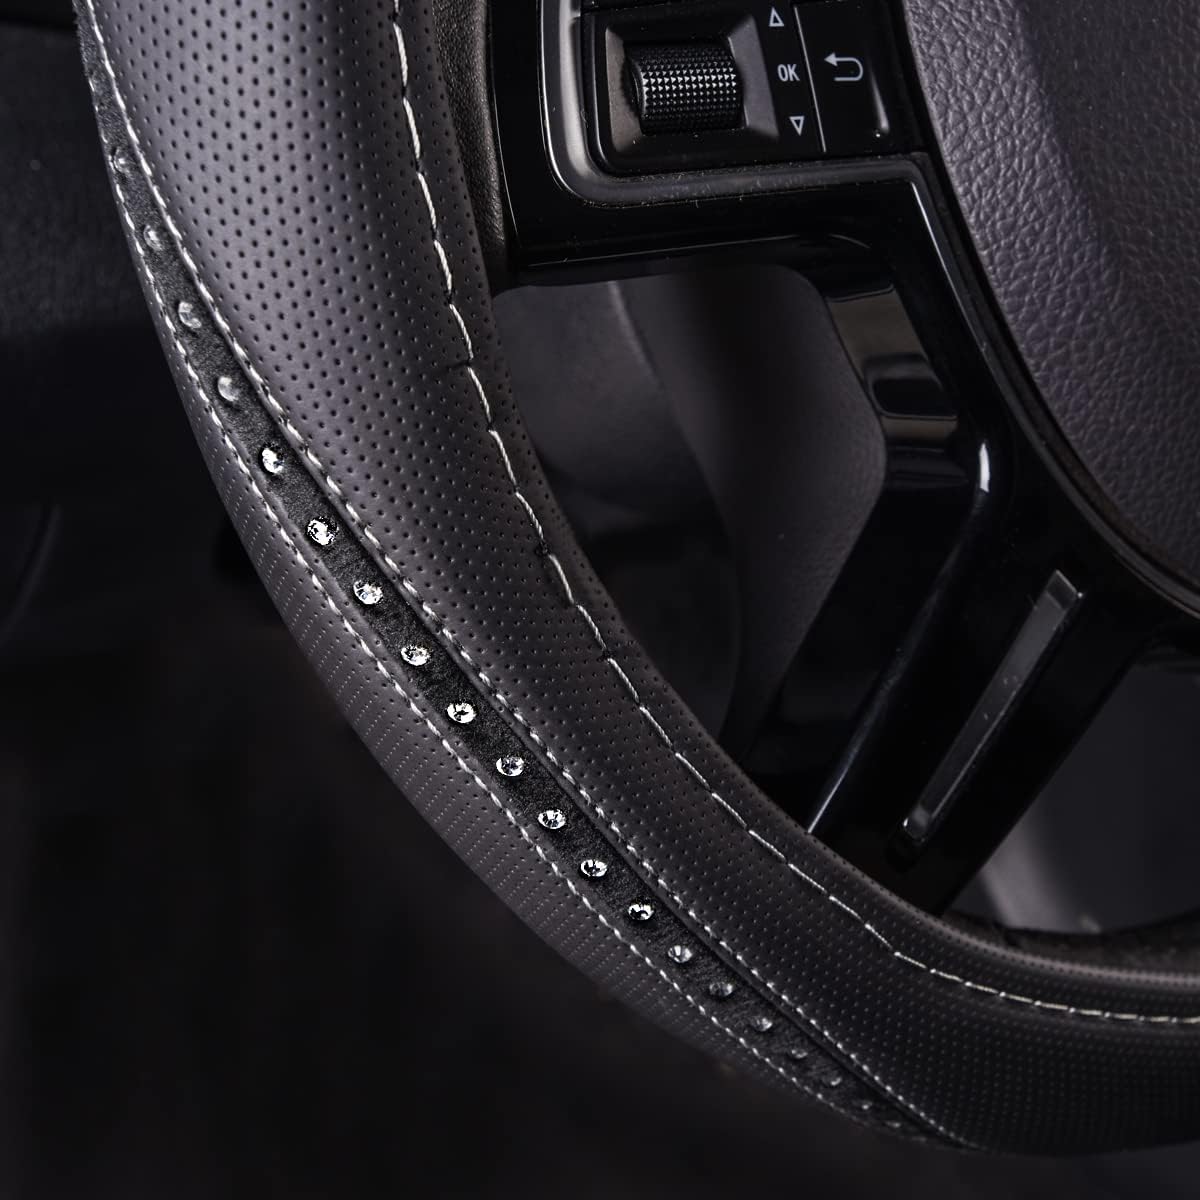 CAR PASS Bling Diamond Leather Steering Wheel Cover, Back Seat Cover, Two Front Seat Cover, Car Floor Mats 4pcs